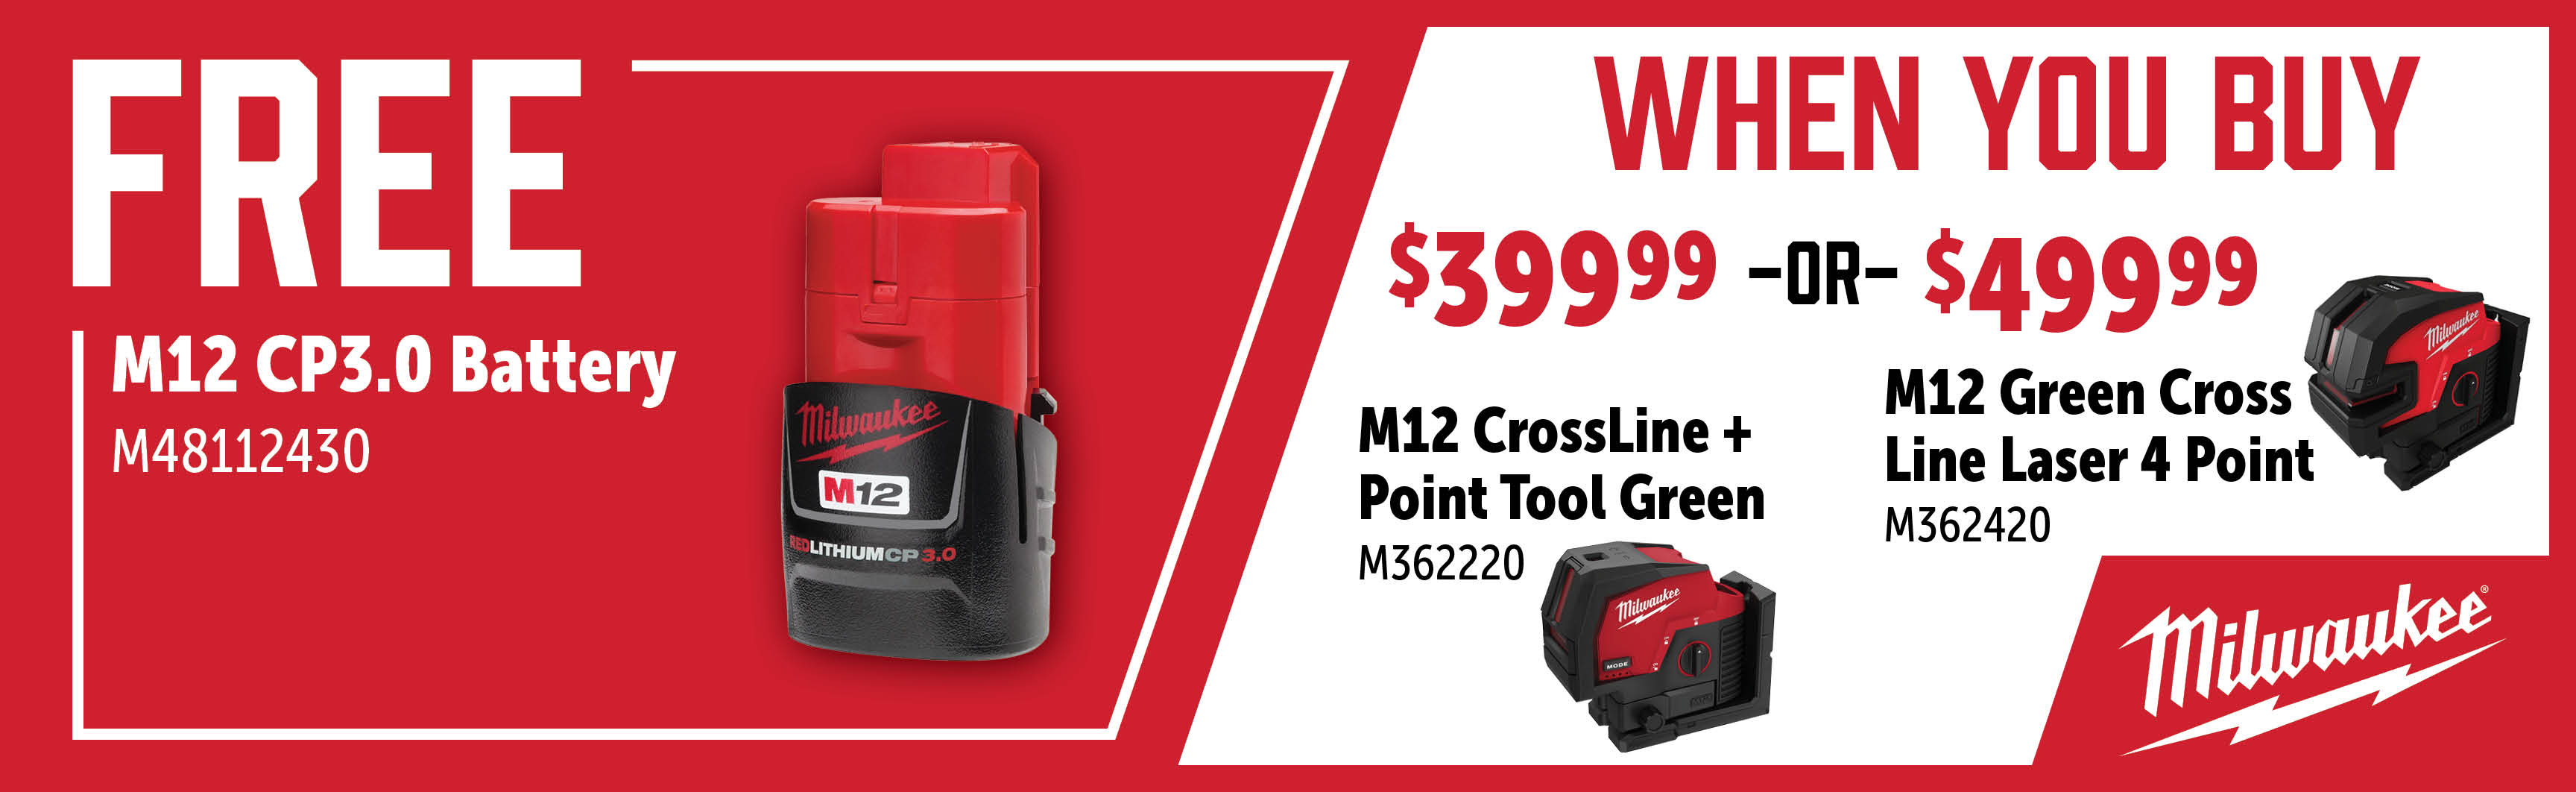 Milwaukee Aug-Oct: Buy a M362220 or M362420 and Get a Free M48112430